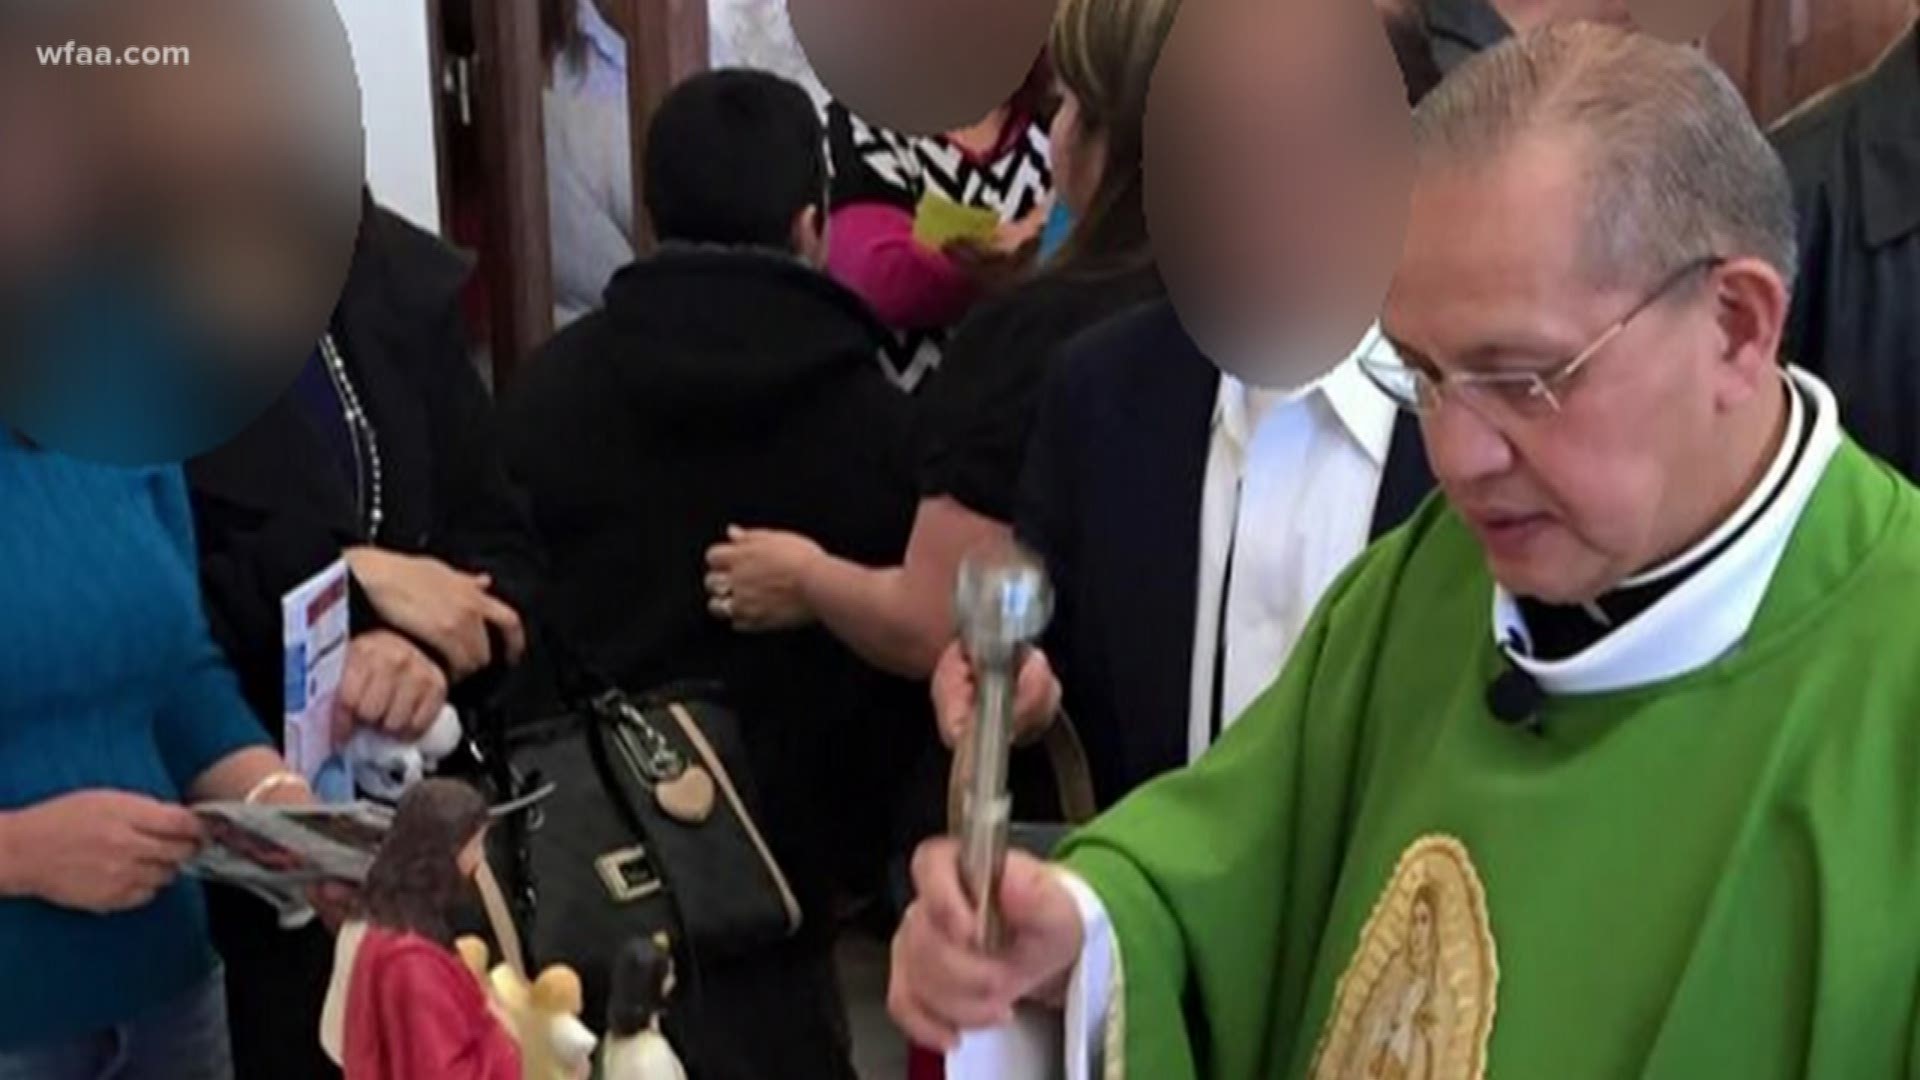 Dallas Diocese Bishop Edward Burns informed parishioners at St. Cecilia Catholic Church this weekend about allegations of sexual abuse by their former pastor, Reverend Edmundo Paredes.